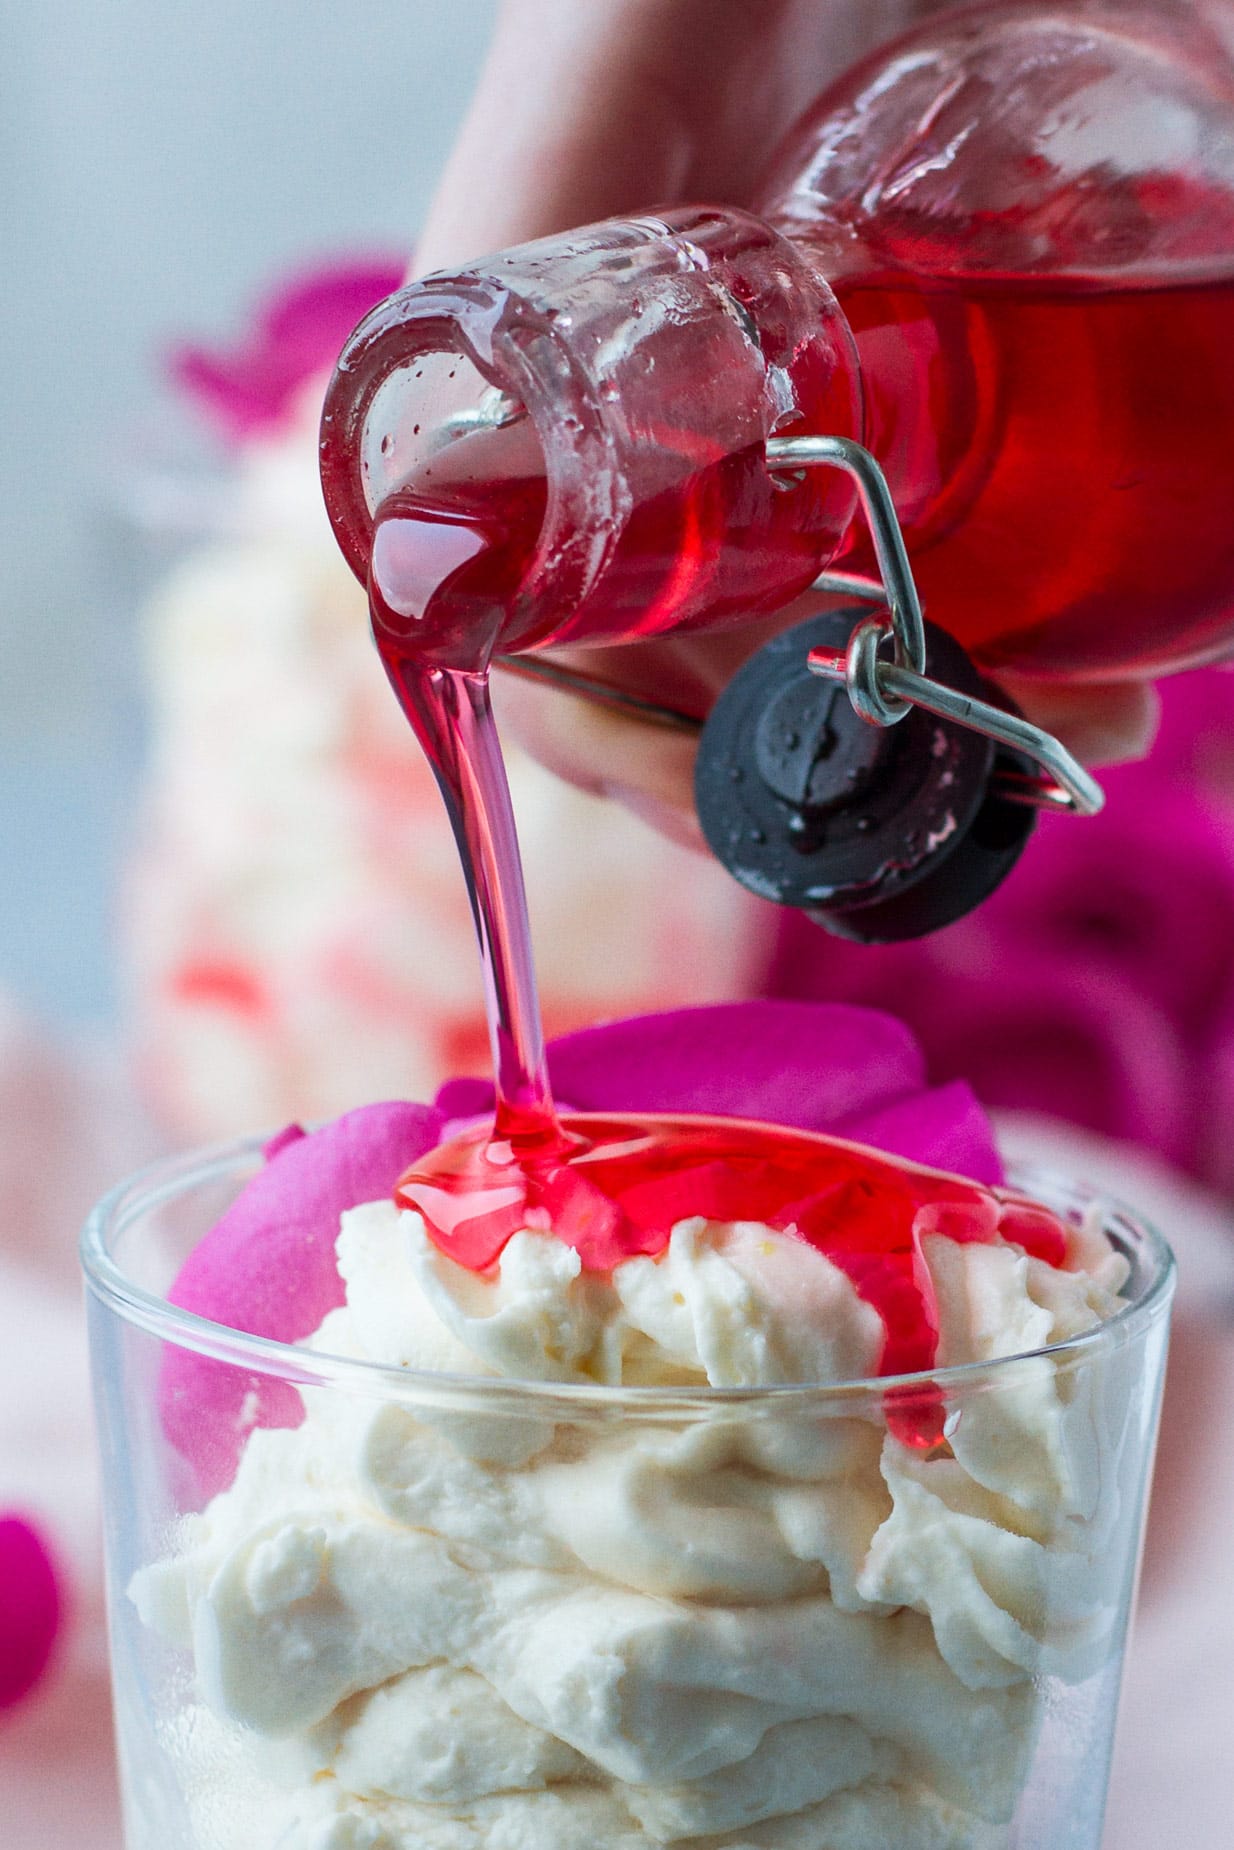 Closeup. A glass with white mousse and a glass of red rose syrup pouring over the white mousse. Blue table and pink cloth, blurred pink roses in the background. 